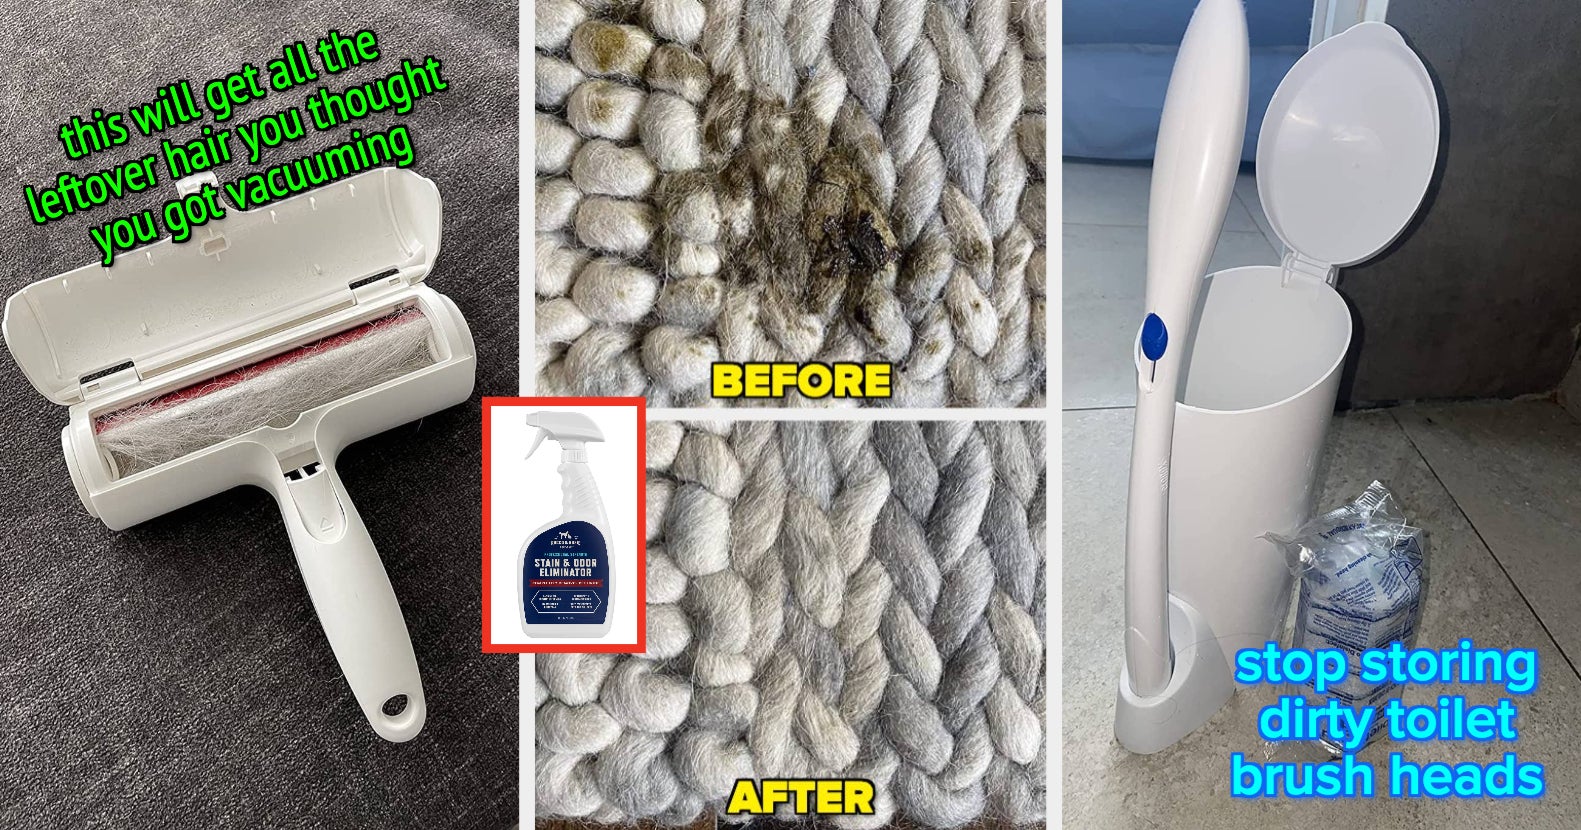  Adam's Home Surface Cleaner - Quickly, Safely Remove & Clean In  Home Surfaces, Removes Odors, Non-Bleaching Formula For Your Kitchen,  Bathroom, Floor & More